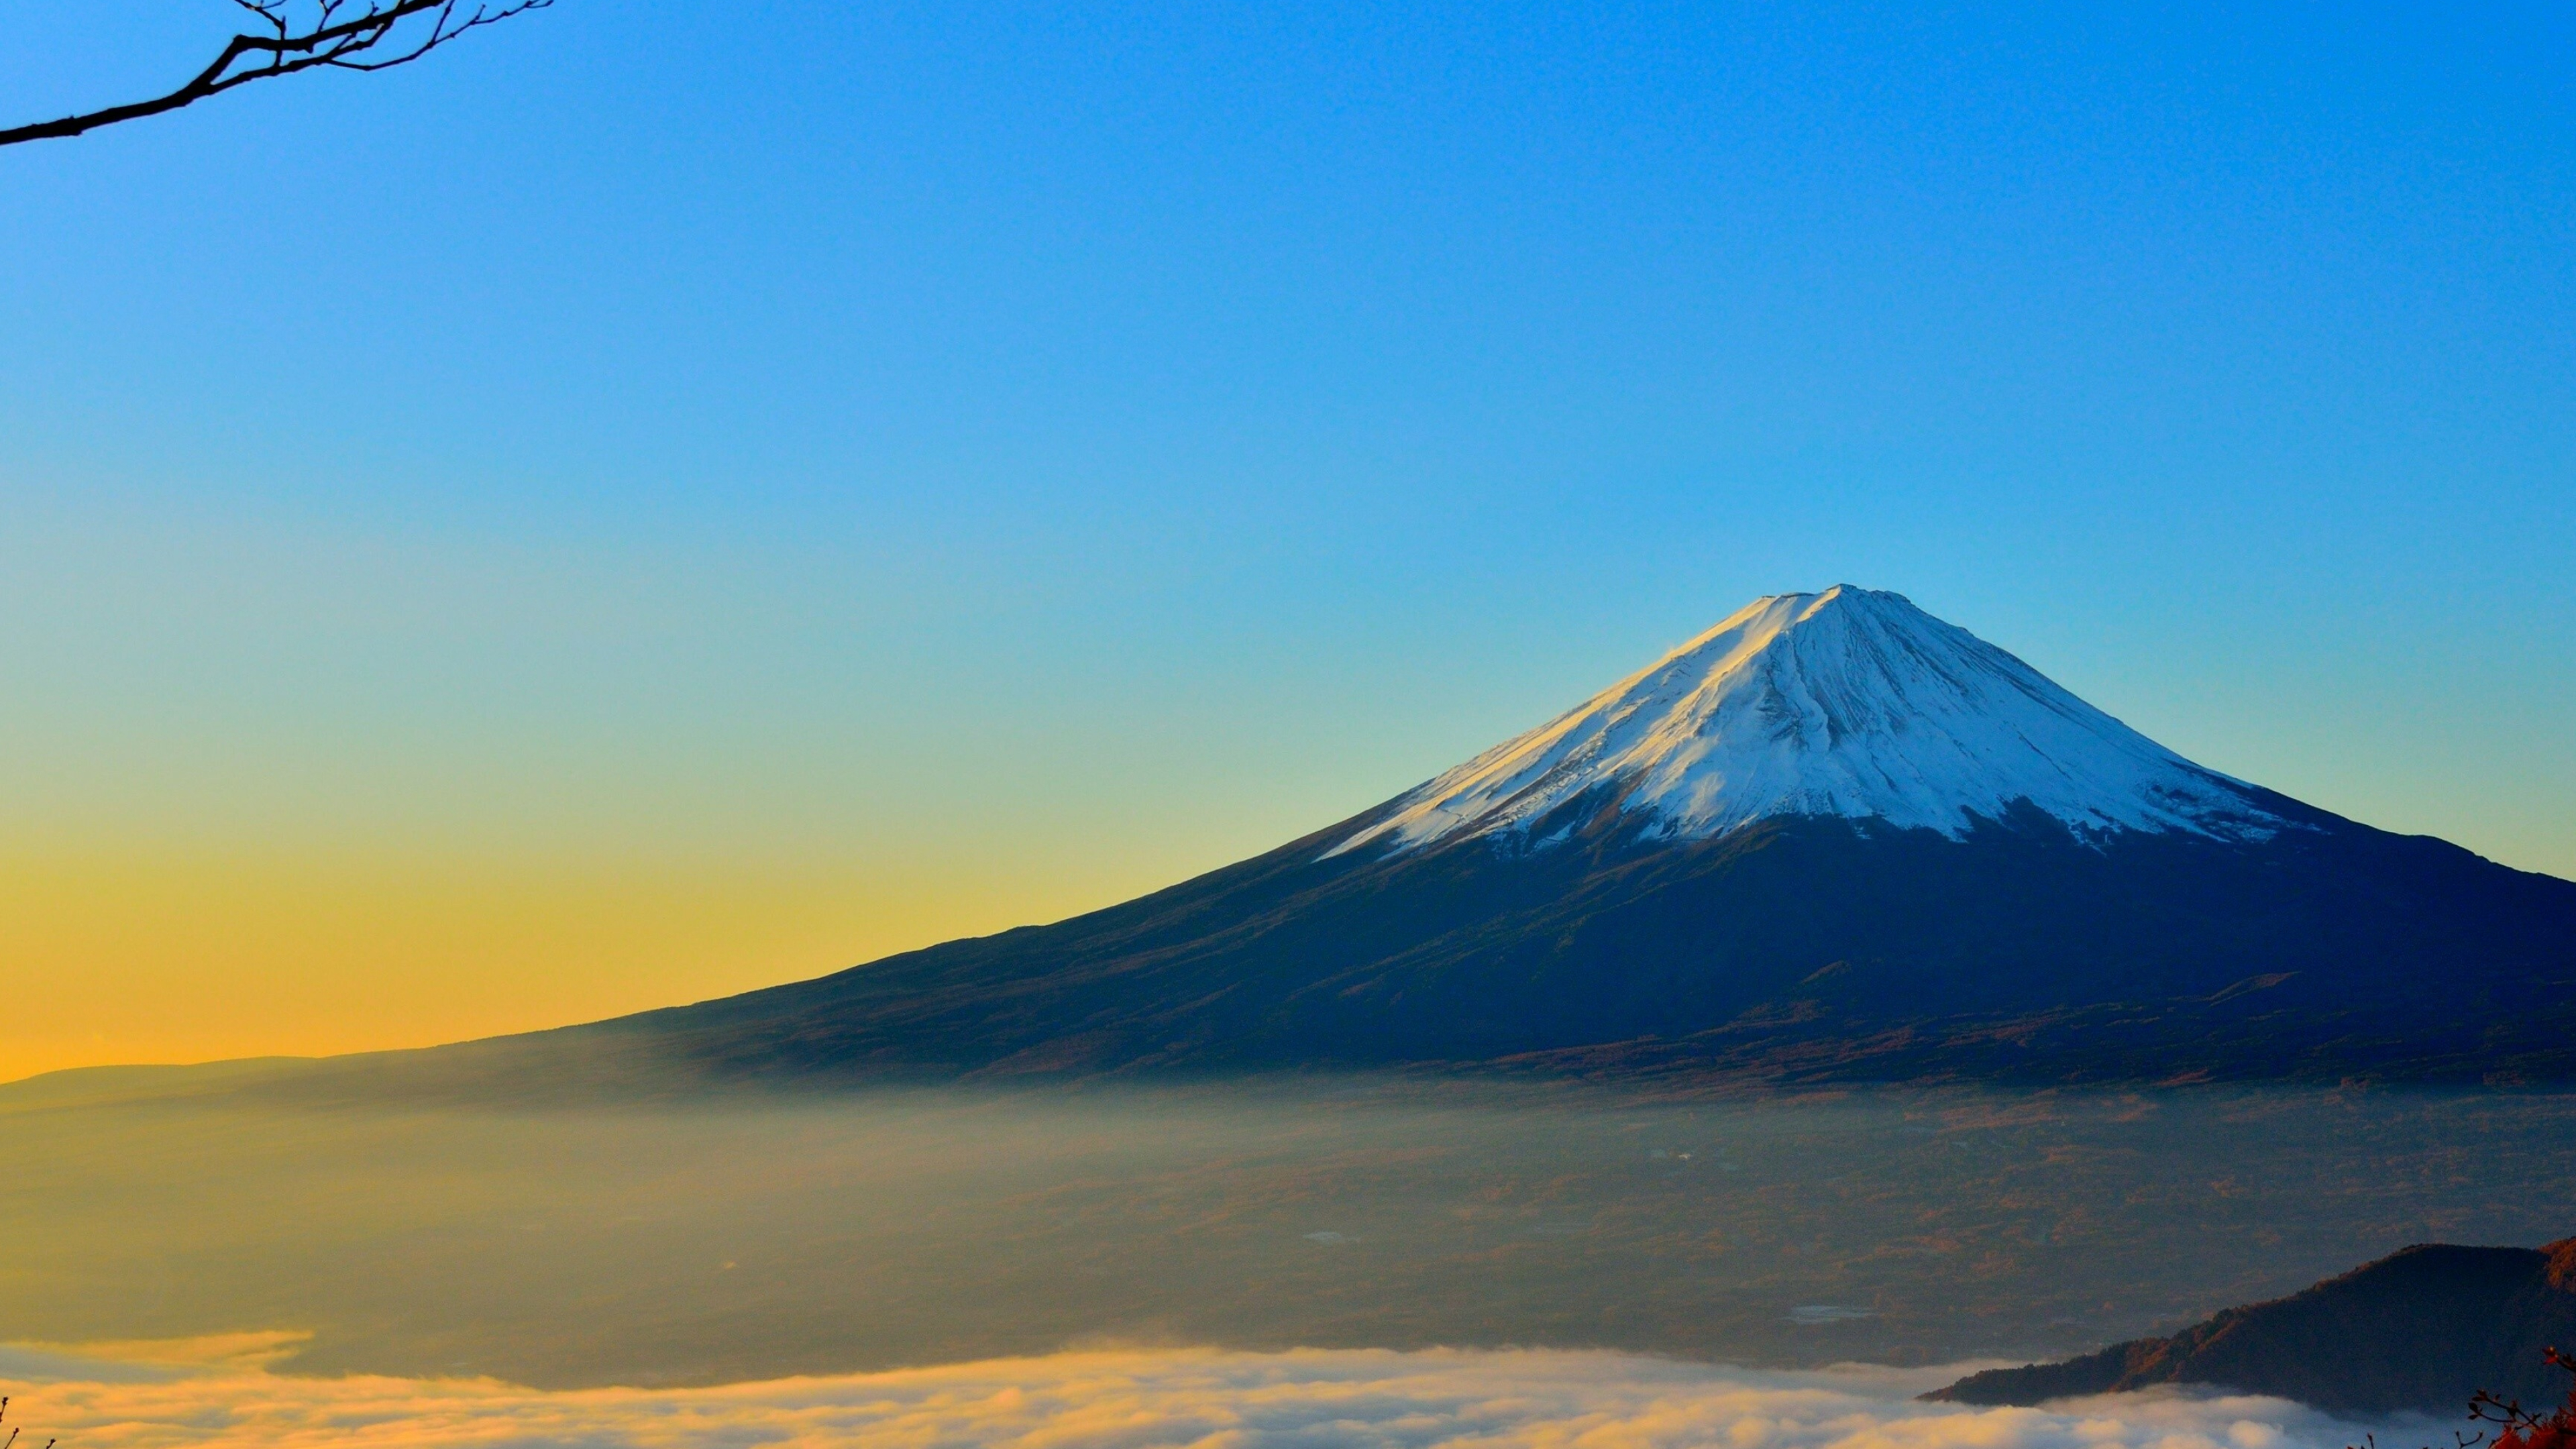 Japan: Mount Fuji, The Empire adopted a Western-modeled constitution in the Meiji period. 3840x2160 4K Wallpaper.